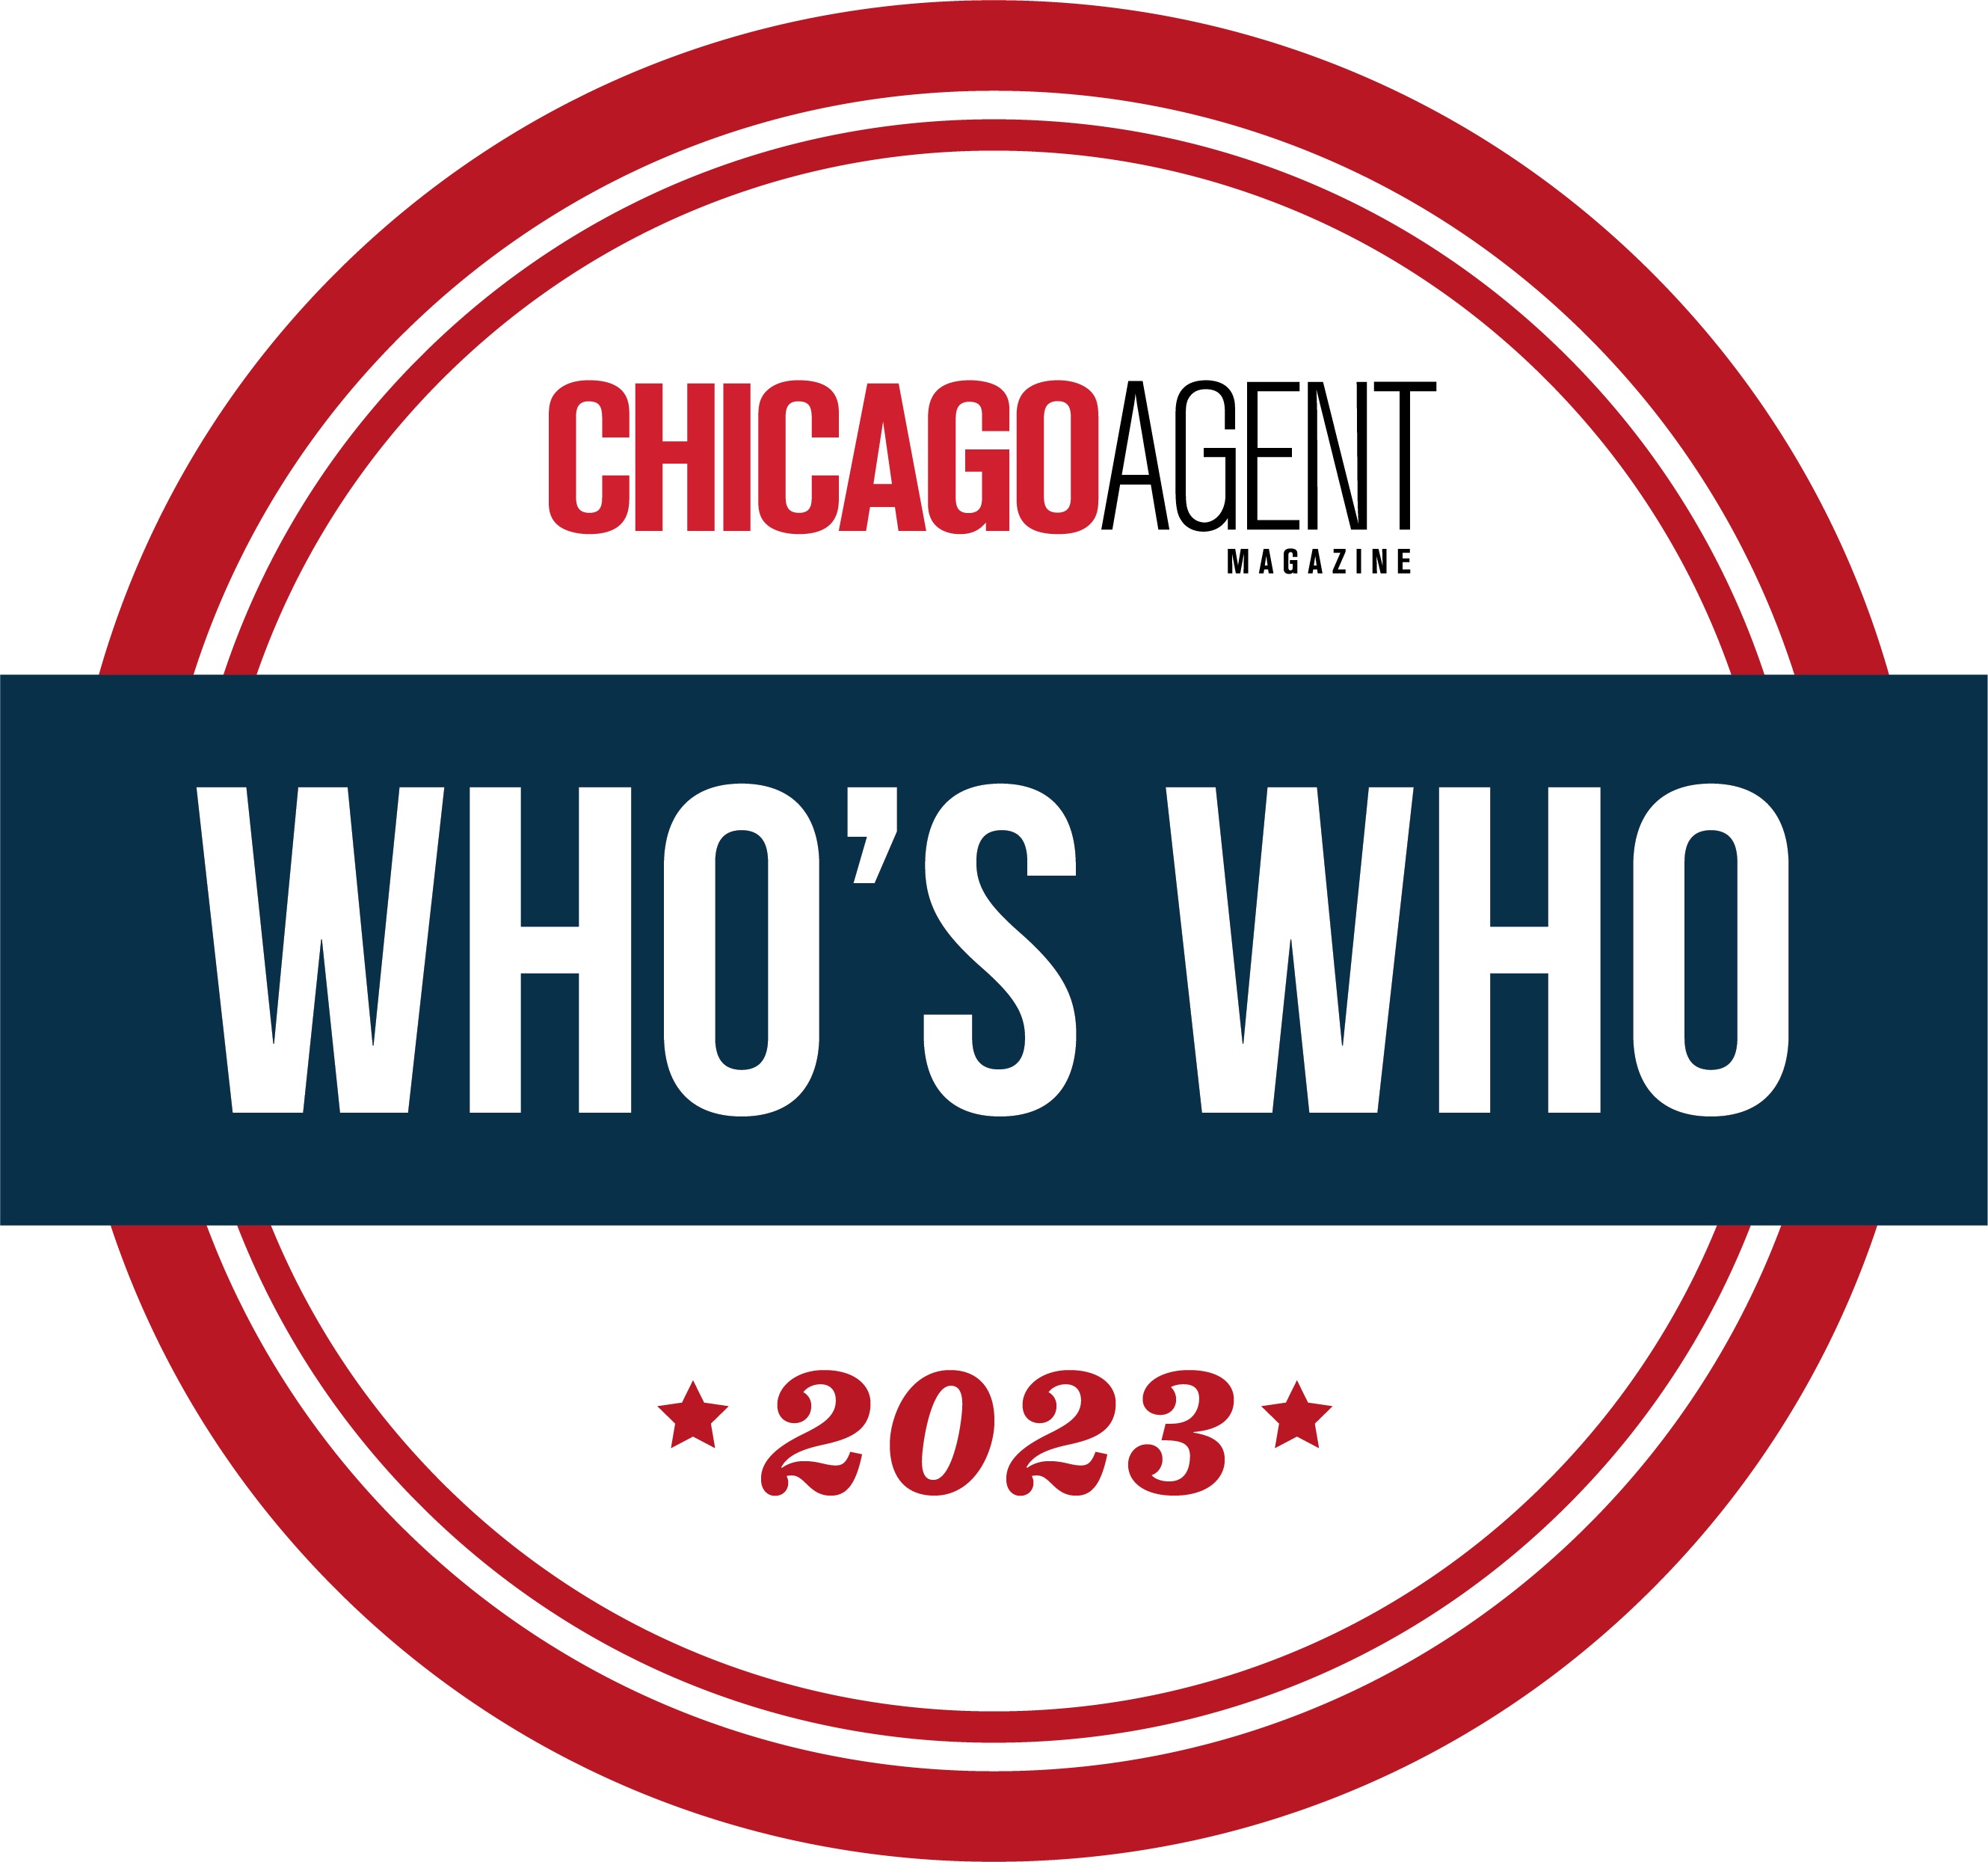 A text banner with the text CHICAGOAGENT2023*2023*